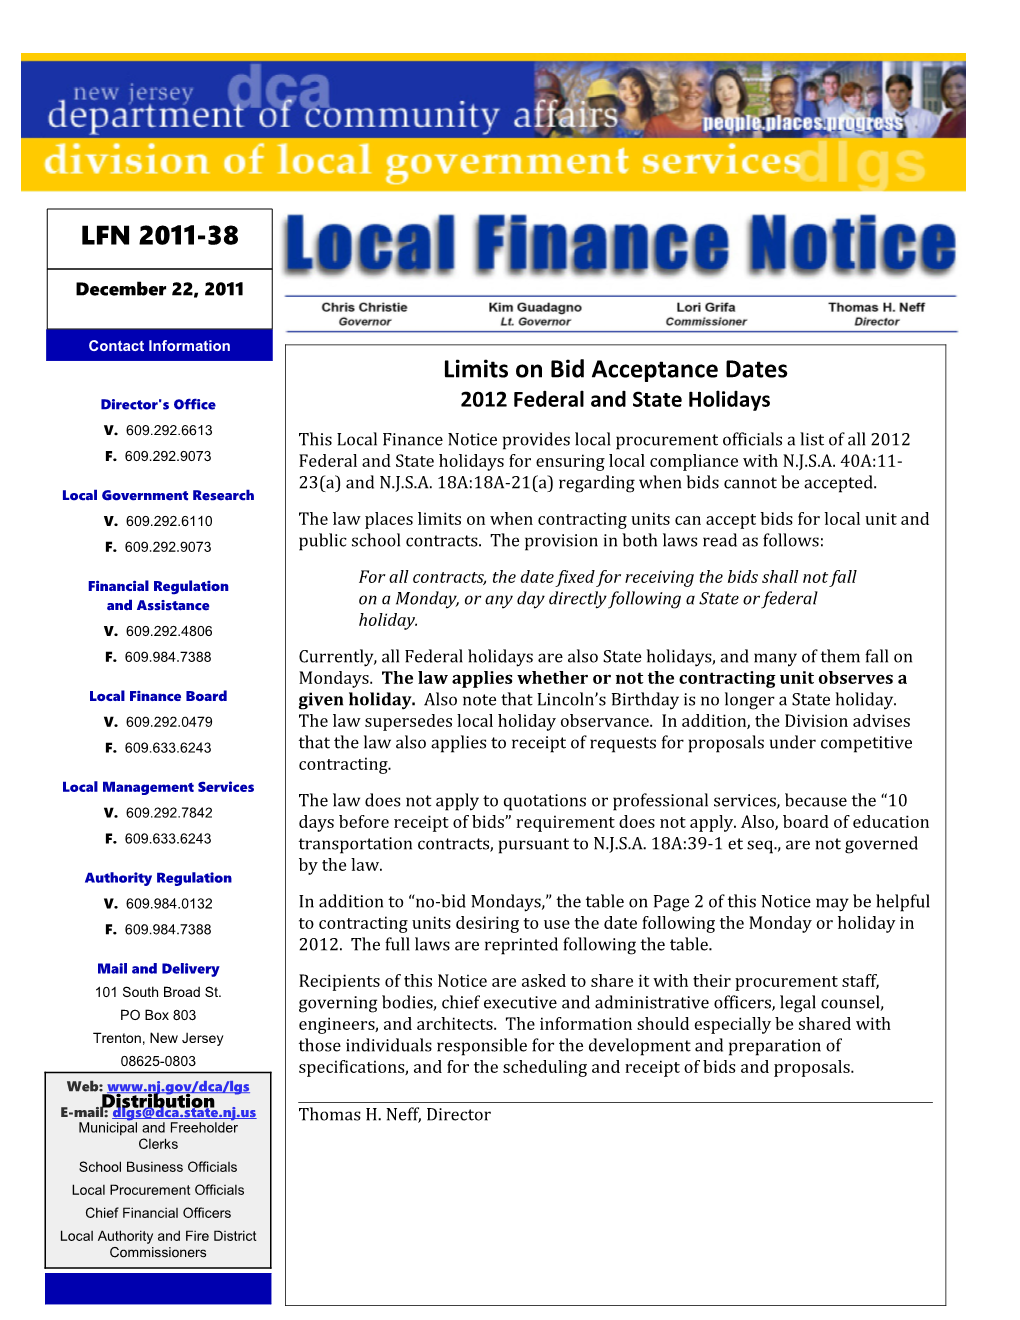 Local Finance Notice 2011-38December 22, 2011Page 1